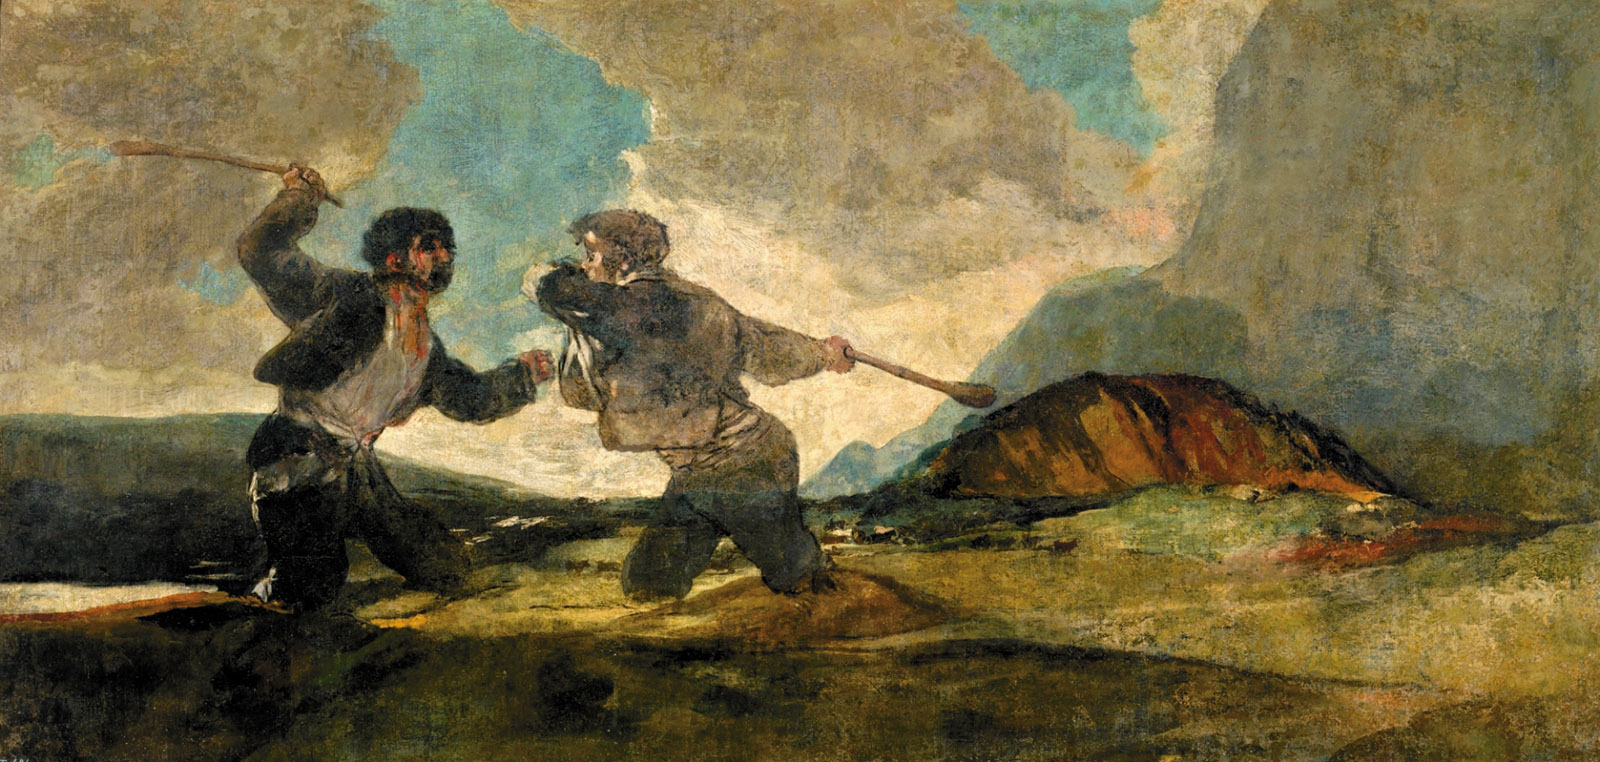 Fight with Cudgels by Francisco Goya